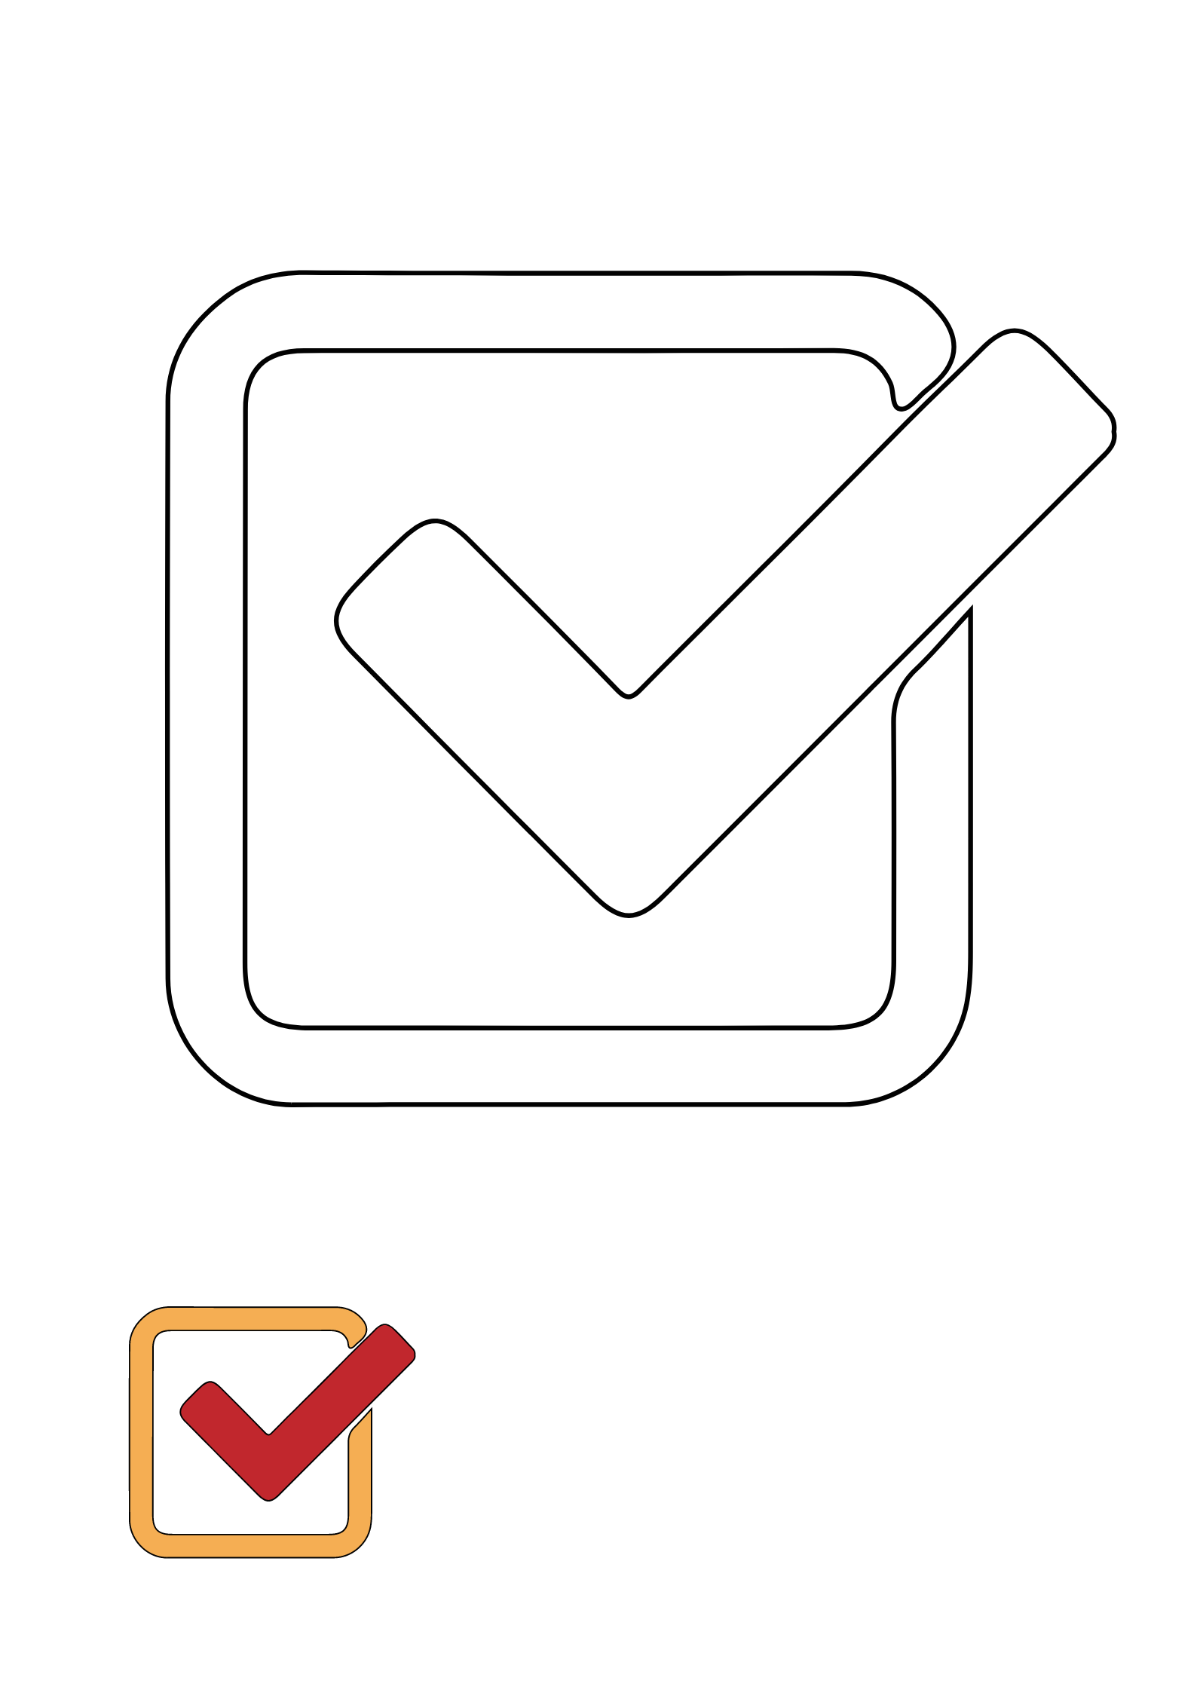 Free Correct Check Mark coloring page Template